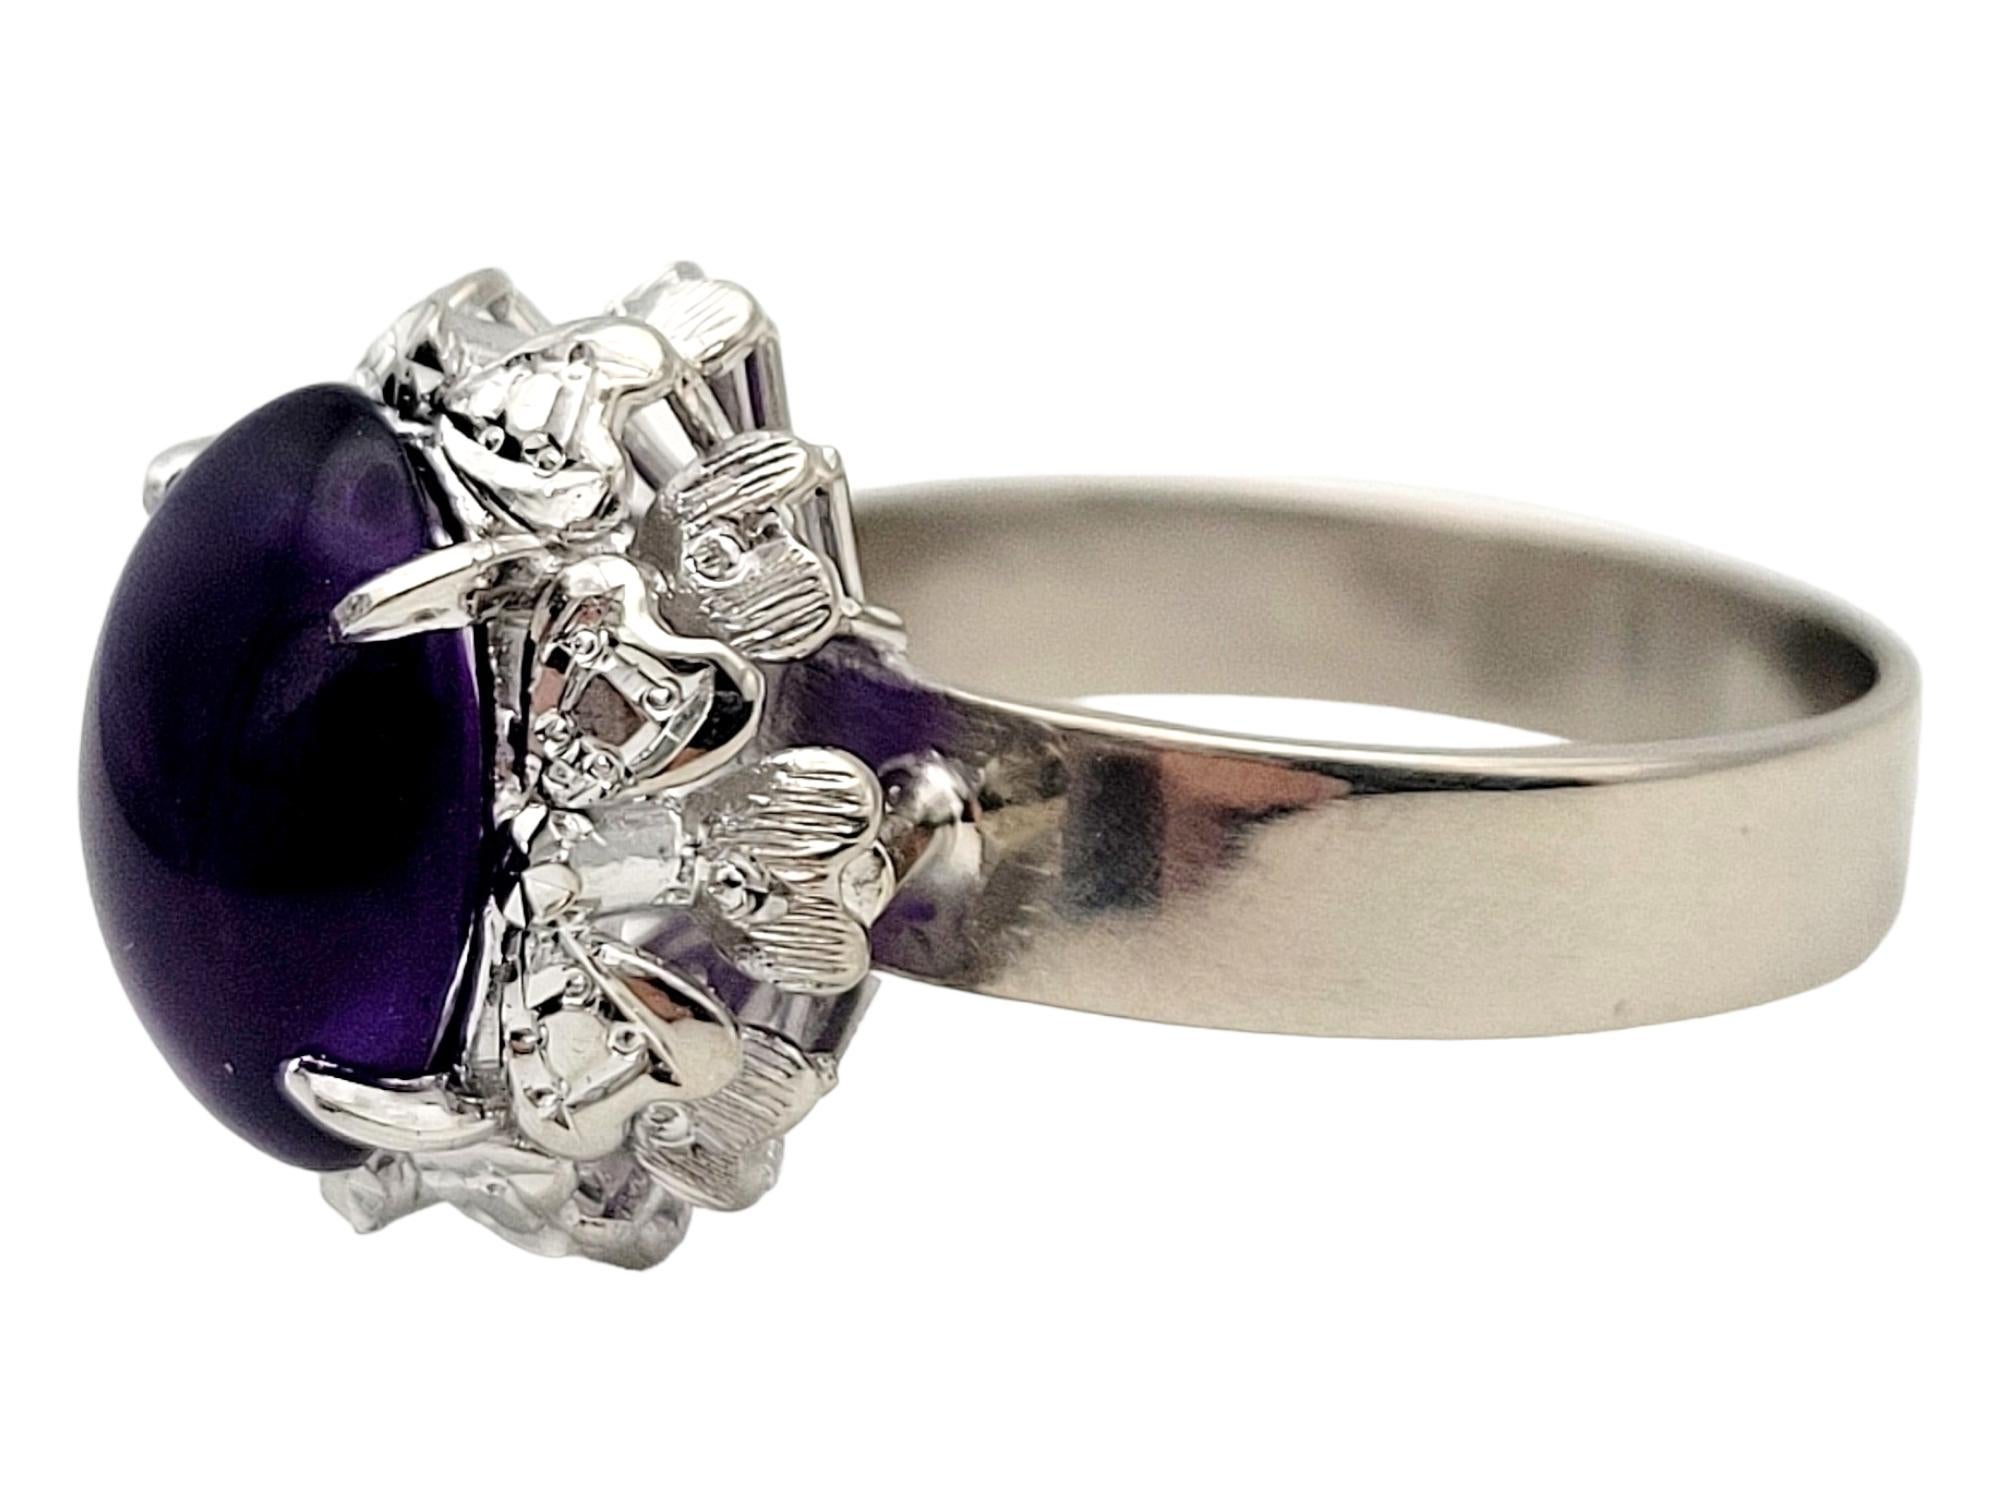 Ring Size 6.75 

Indulge in the timeless allure of this stunning cabochon amethyst solitaire cocktail ring. Elegantly designed, this incredible 10 karat white gold ring showcases a high profile 4.00 carat oval cabochon amethyst gemstone that